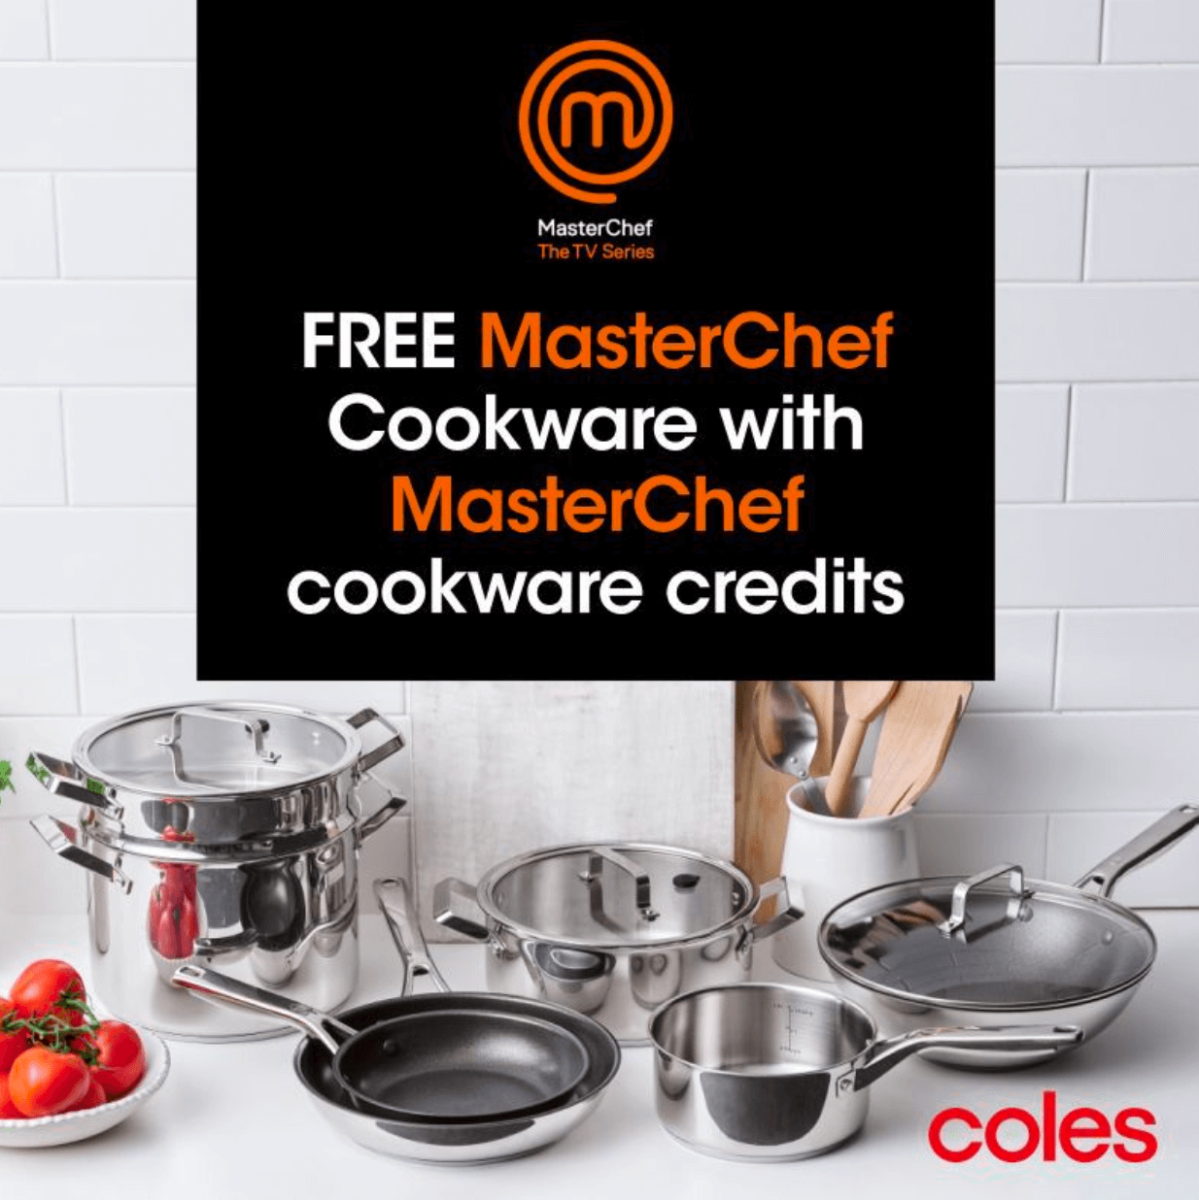 Are MasterChef cookware products worth as much as New World claims? -  Consumer NZ